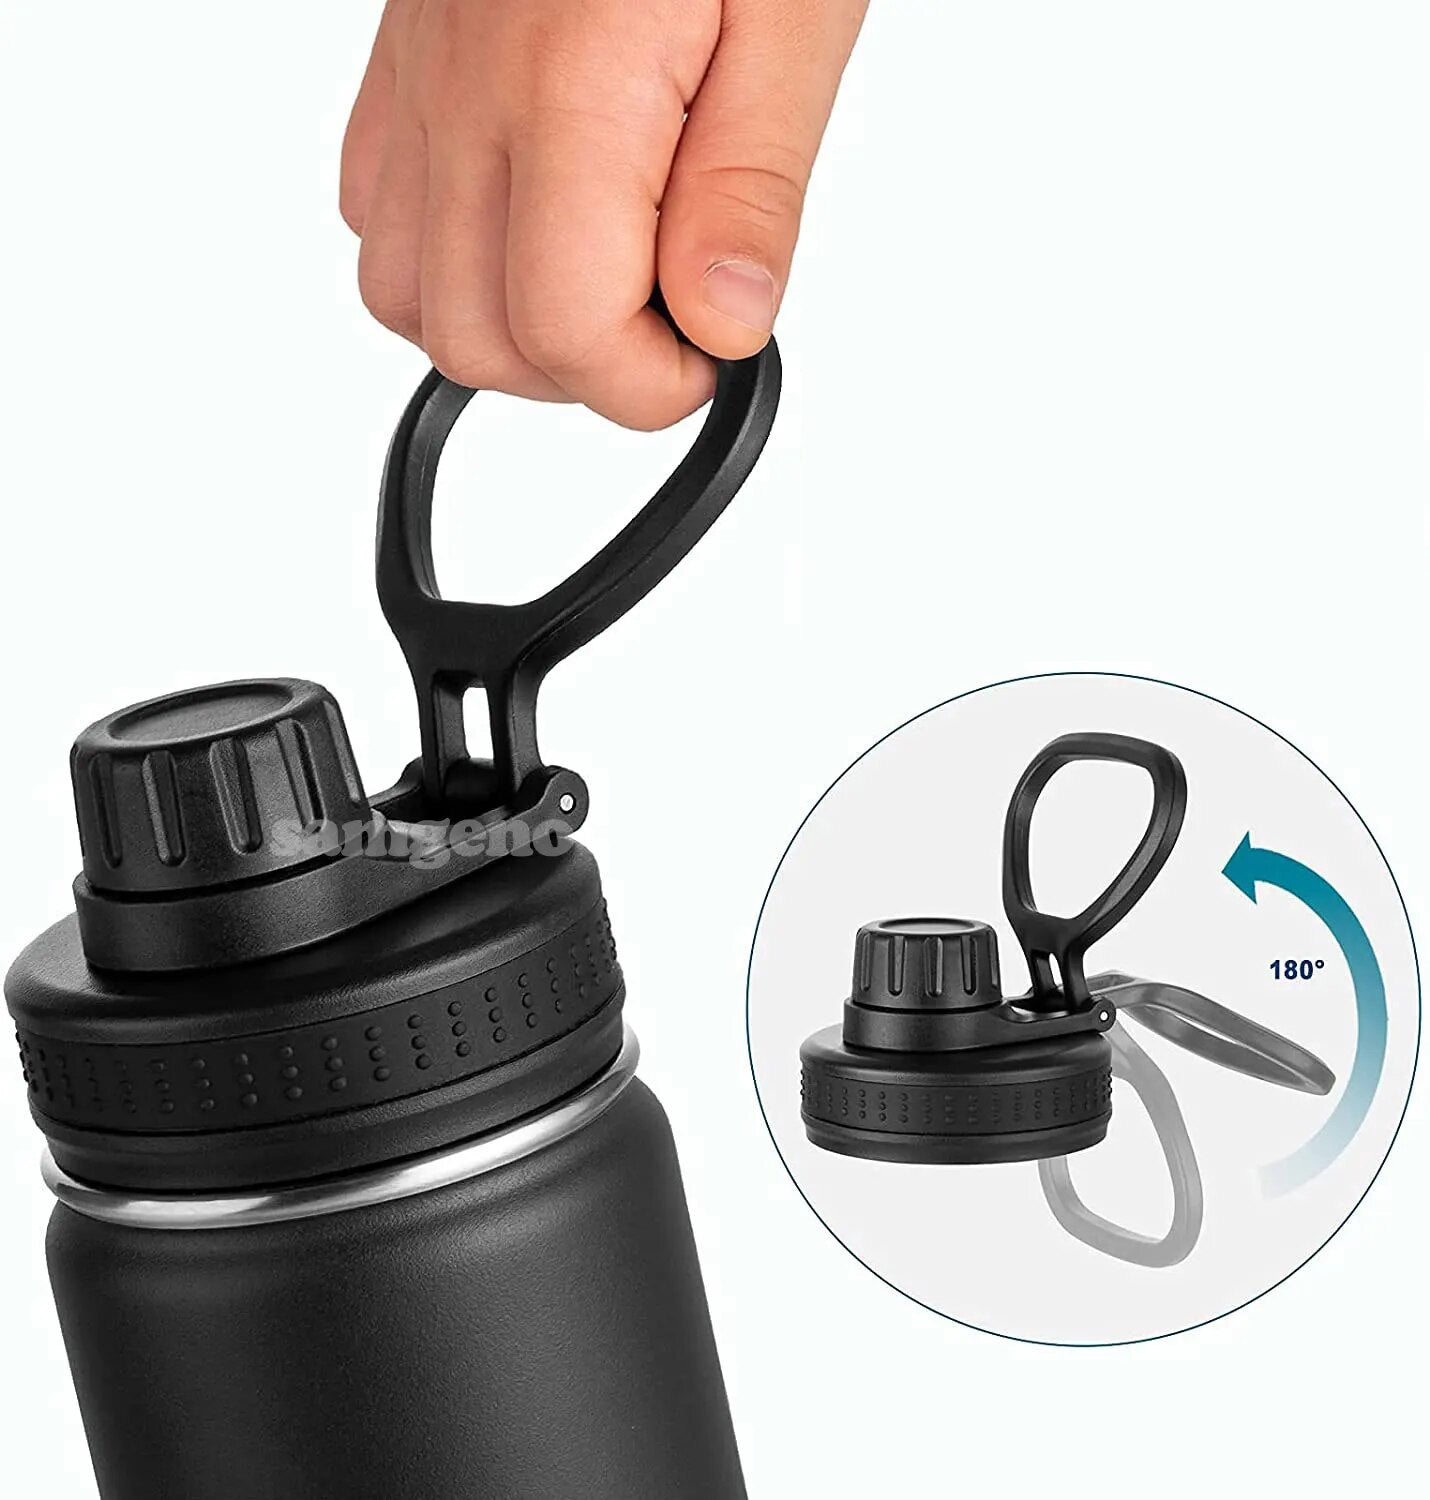 Image for 32 oz or 1000 ML stainless steel water bottle in black color, with double wall vacuum insulation. The bottle has dual lid with built-in carrying handle. It shows how the attached handle can be moved 180 degrees up and down while attached to the lid.